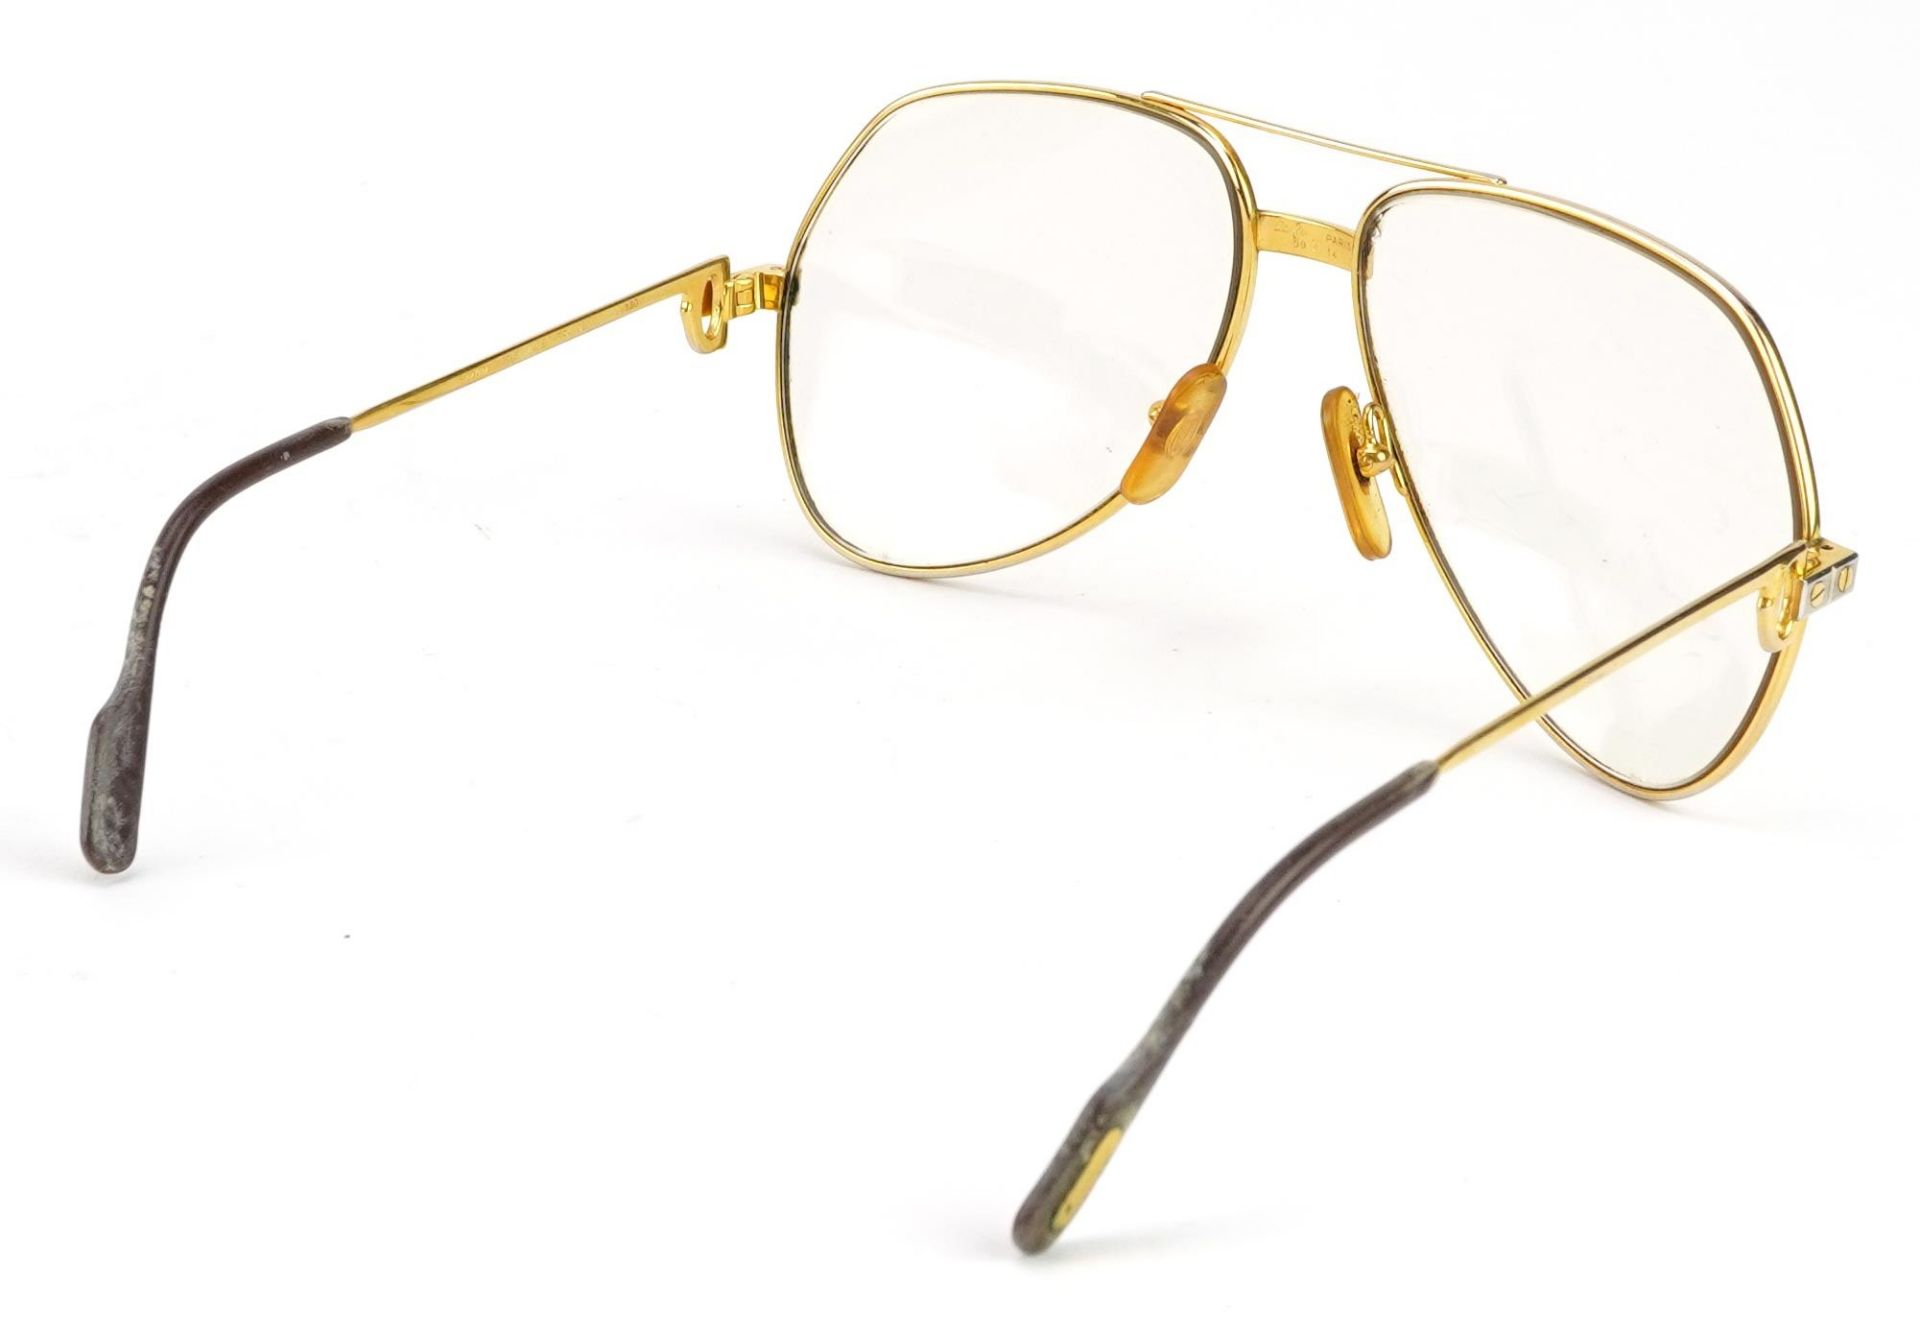 Pair of vintage Must de Cartier spectacles with fitted case numbered 5914, 14.5cm wide - Image 5 of 8